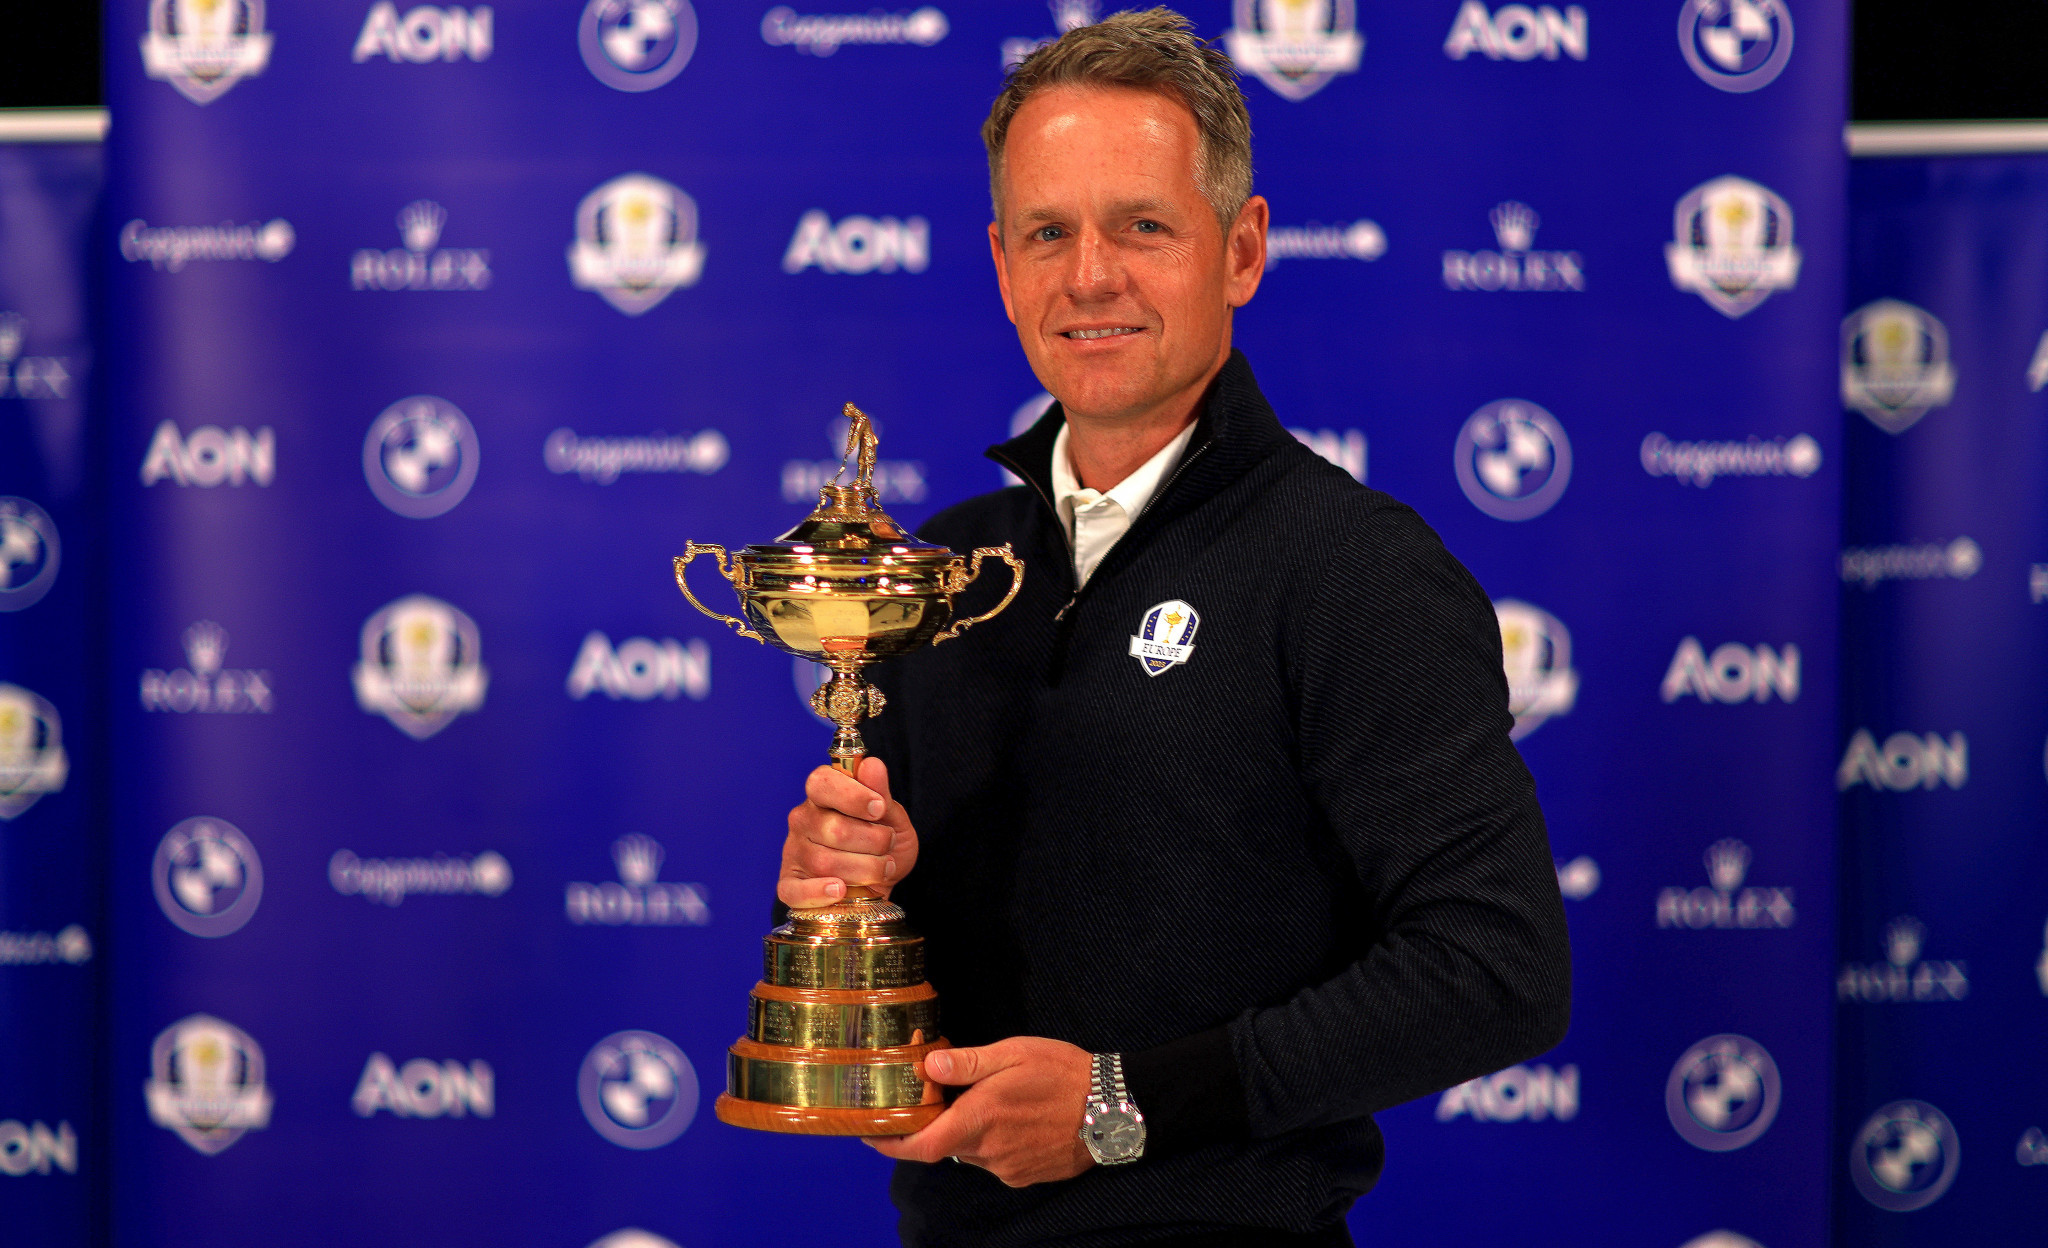 Donald named Europe Ryder Cup captain after Stenson sacking